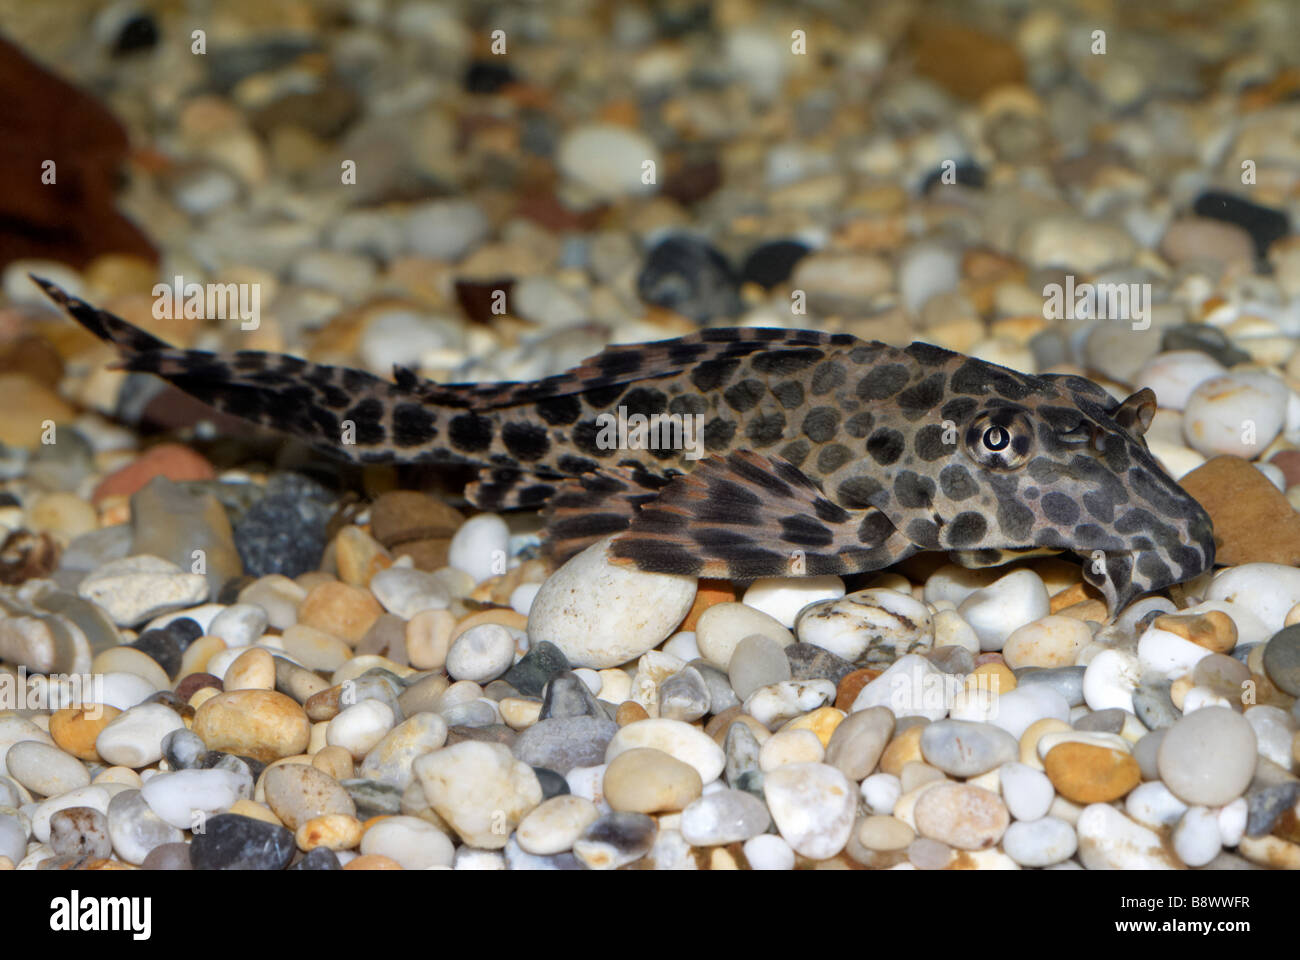 PTERYGOPLICHTYS GIBBICEPS, GIBBY, VOILE FIN PLECO Banque D'Images